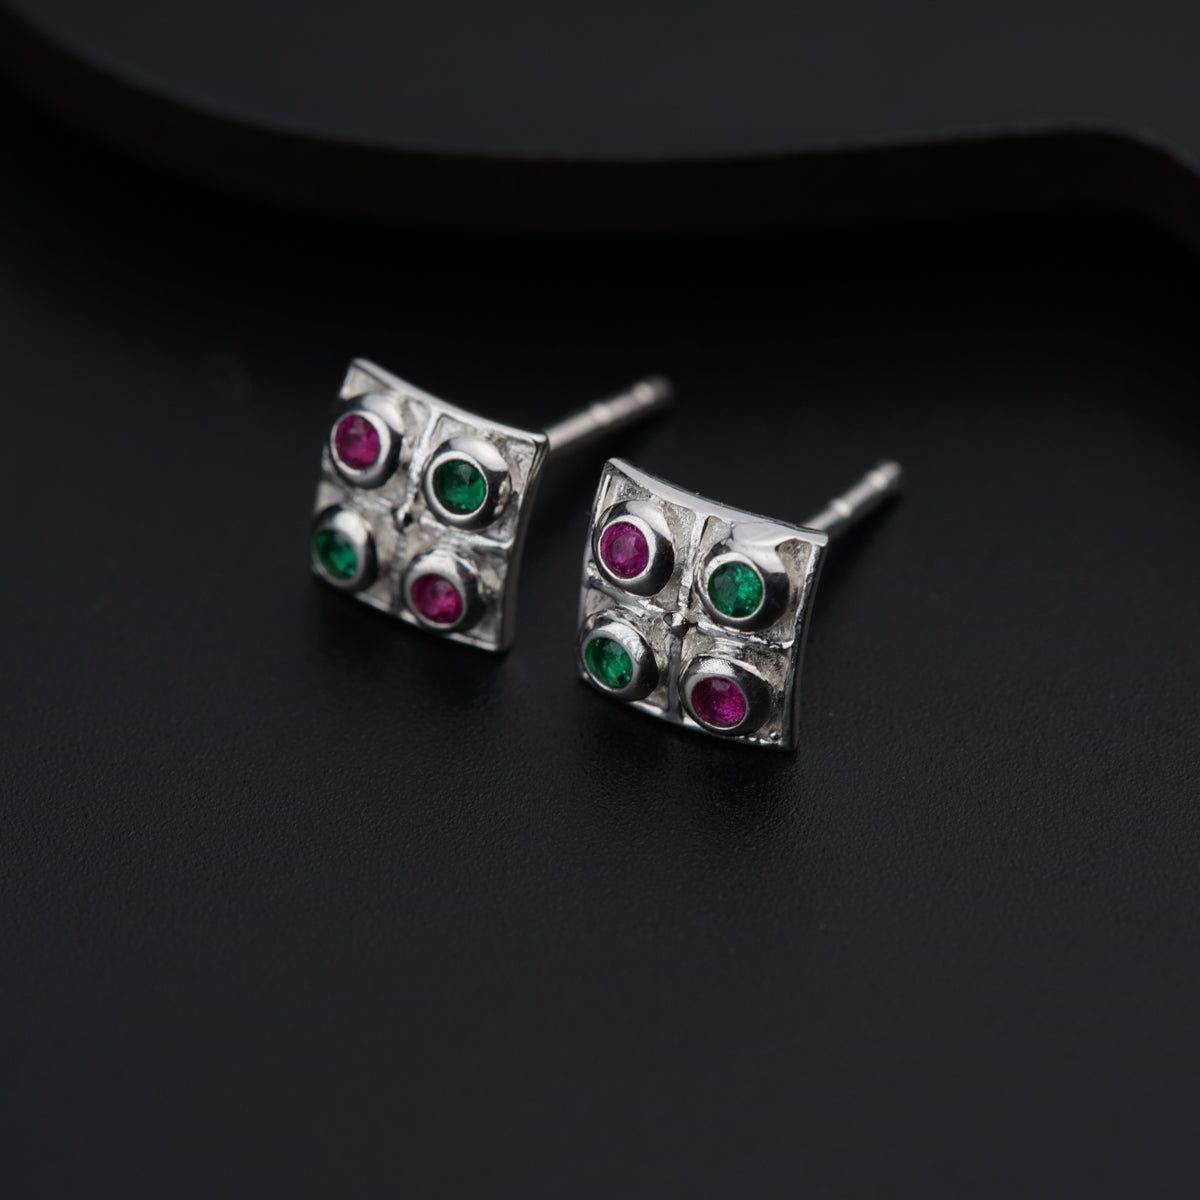 a pair of silver earrings with colored stones